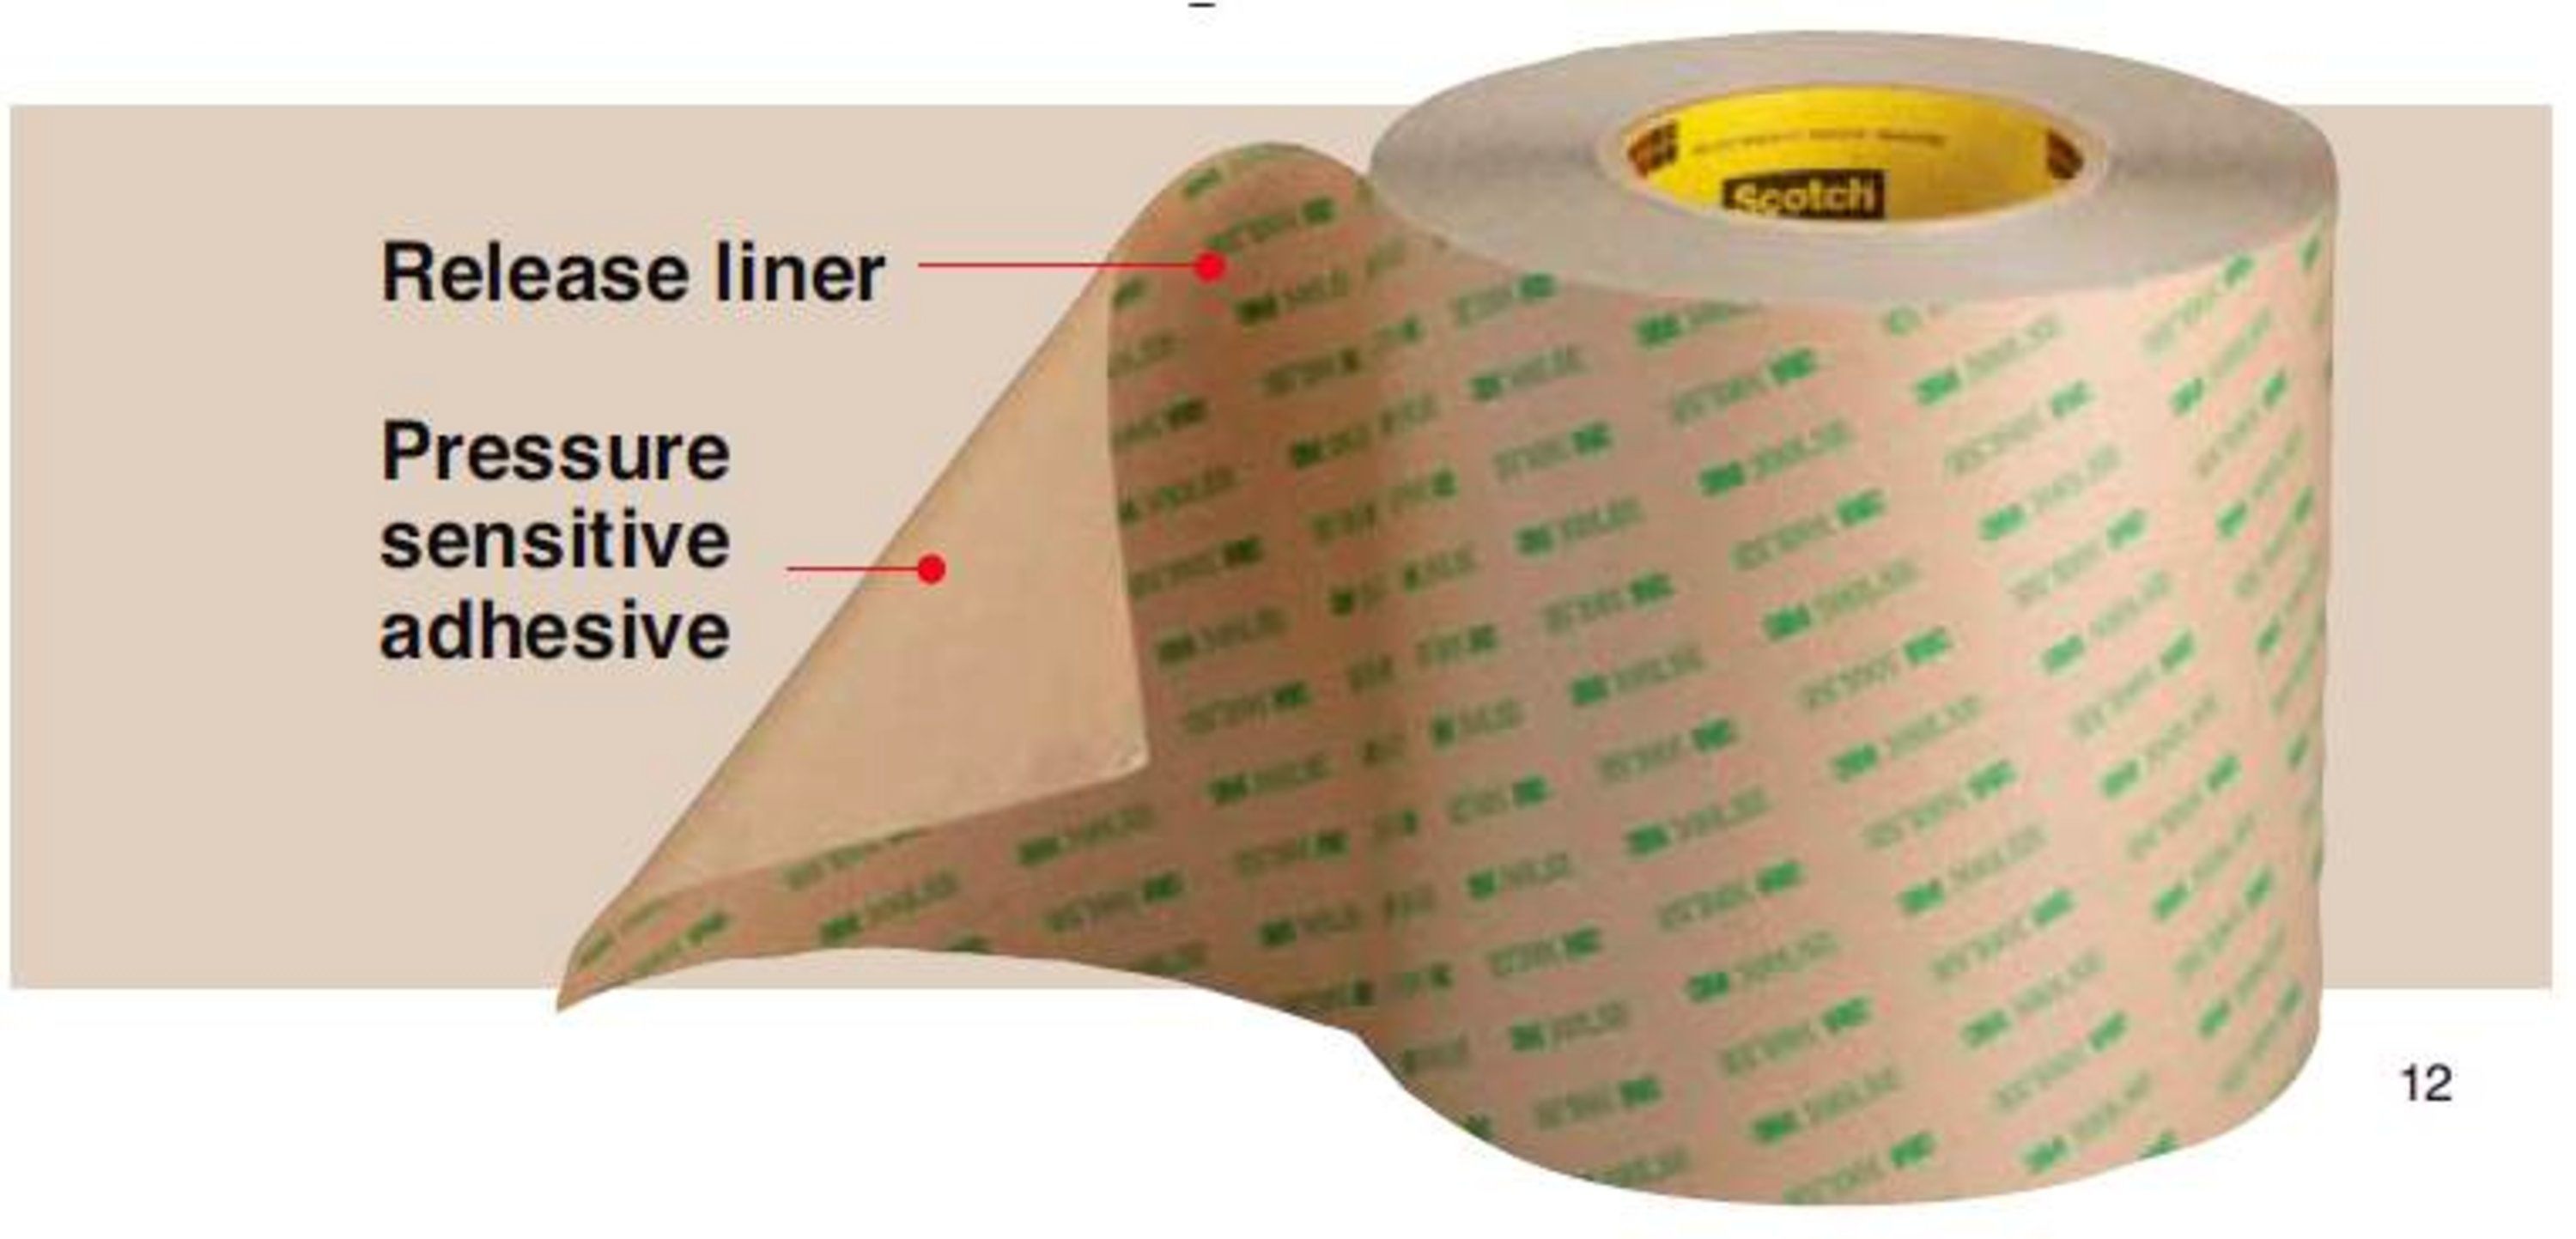 3M™ VHB™ Adhesive Transfer Tape F9469PC utilizes the bonding power of 3M™ High Performance Acrylic Adhesive 100MP, providing much higher adhesion strength than typical pressure sensitive adhesive systems.